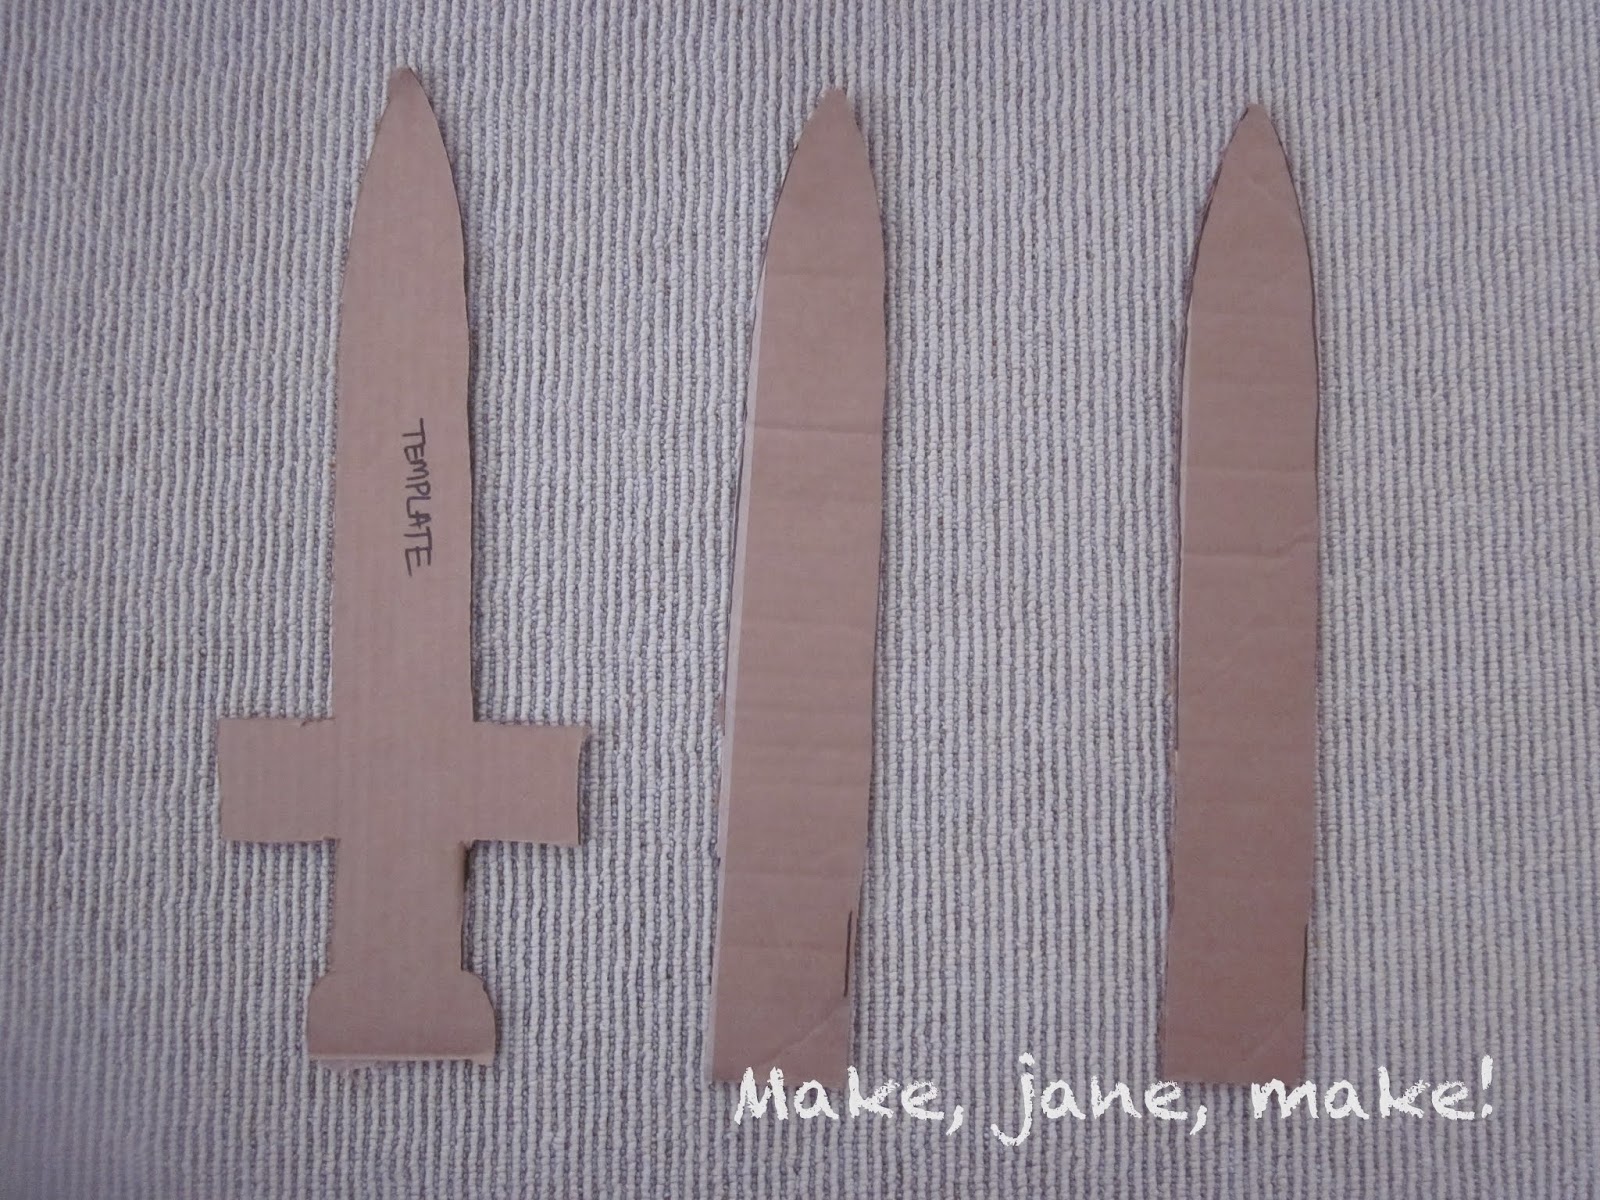 Design and build your own knife sheath, Tutorials